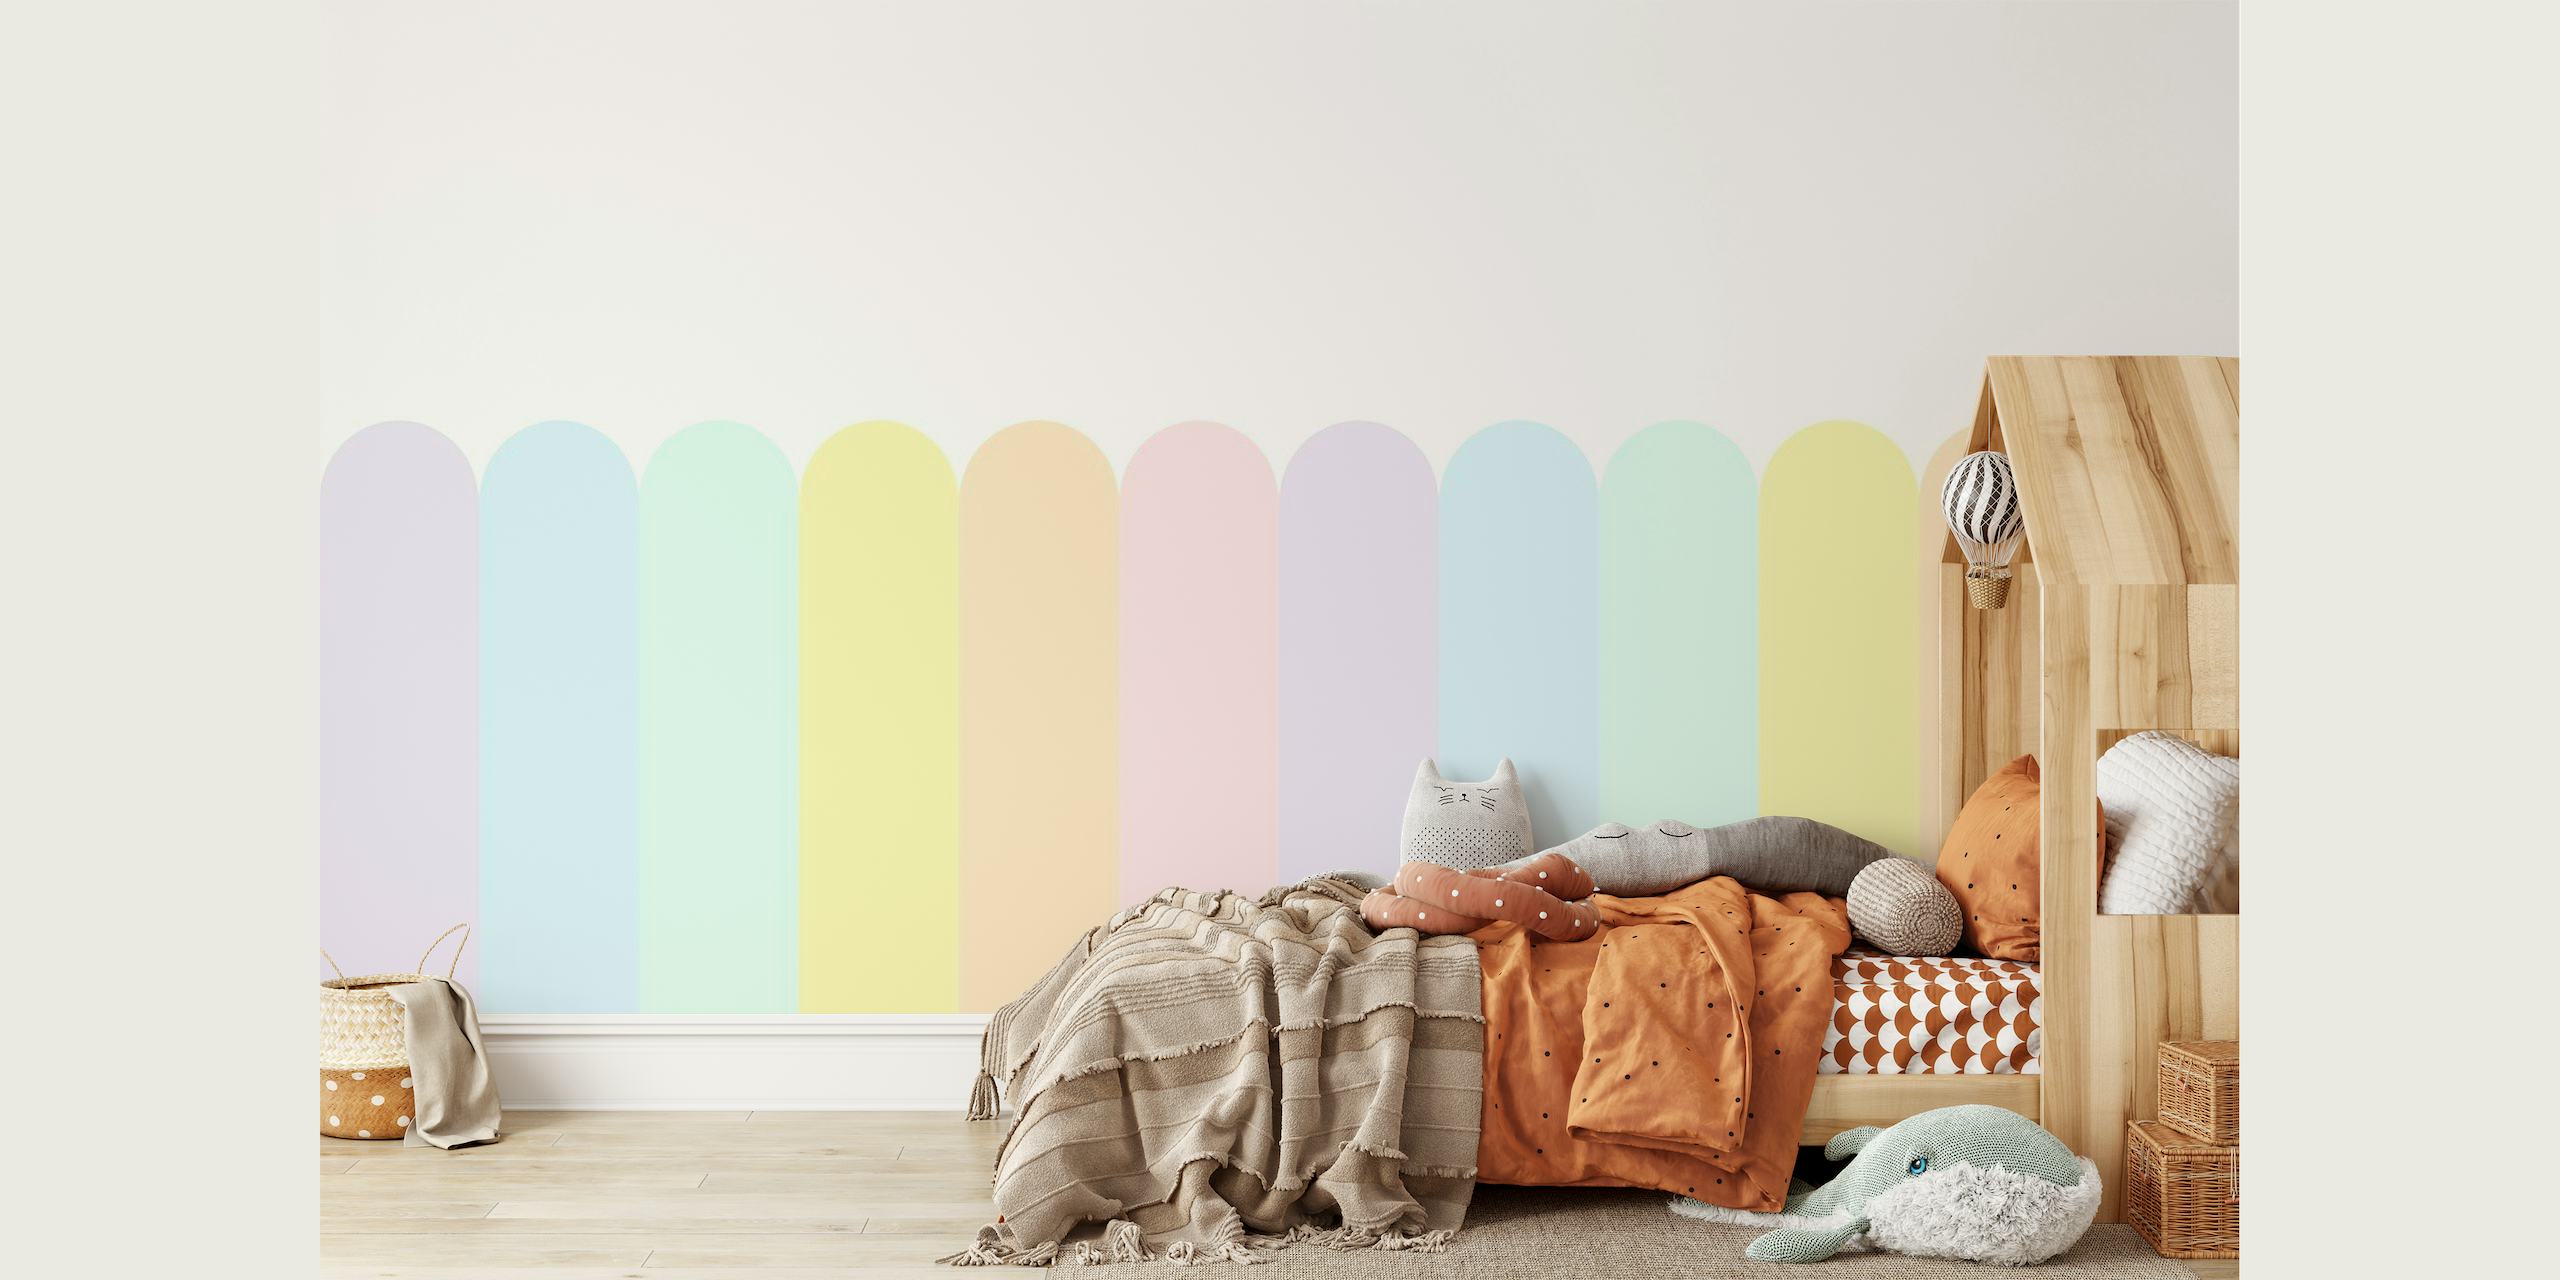 Soft pastel rainbow colors in scalloped pattern for wall mural